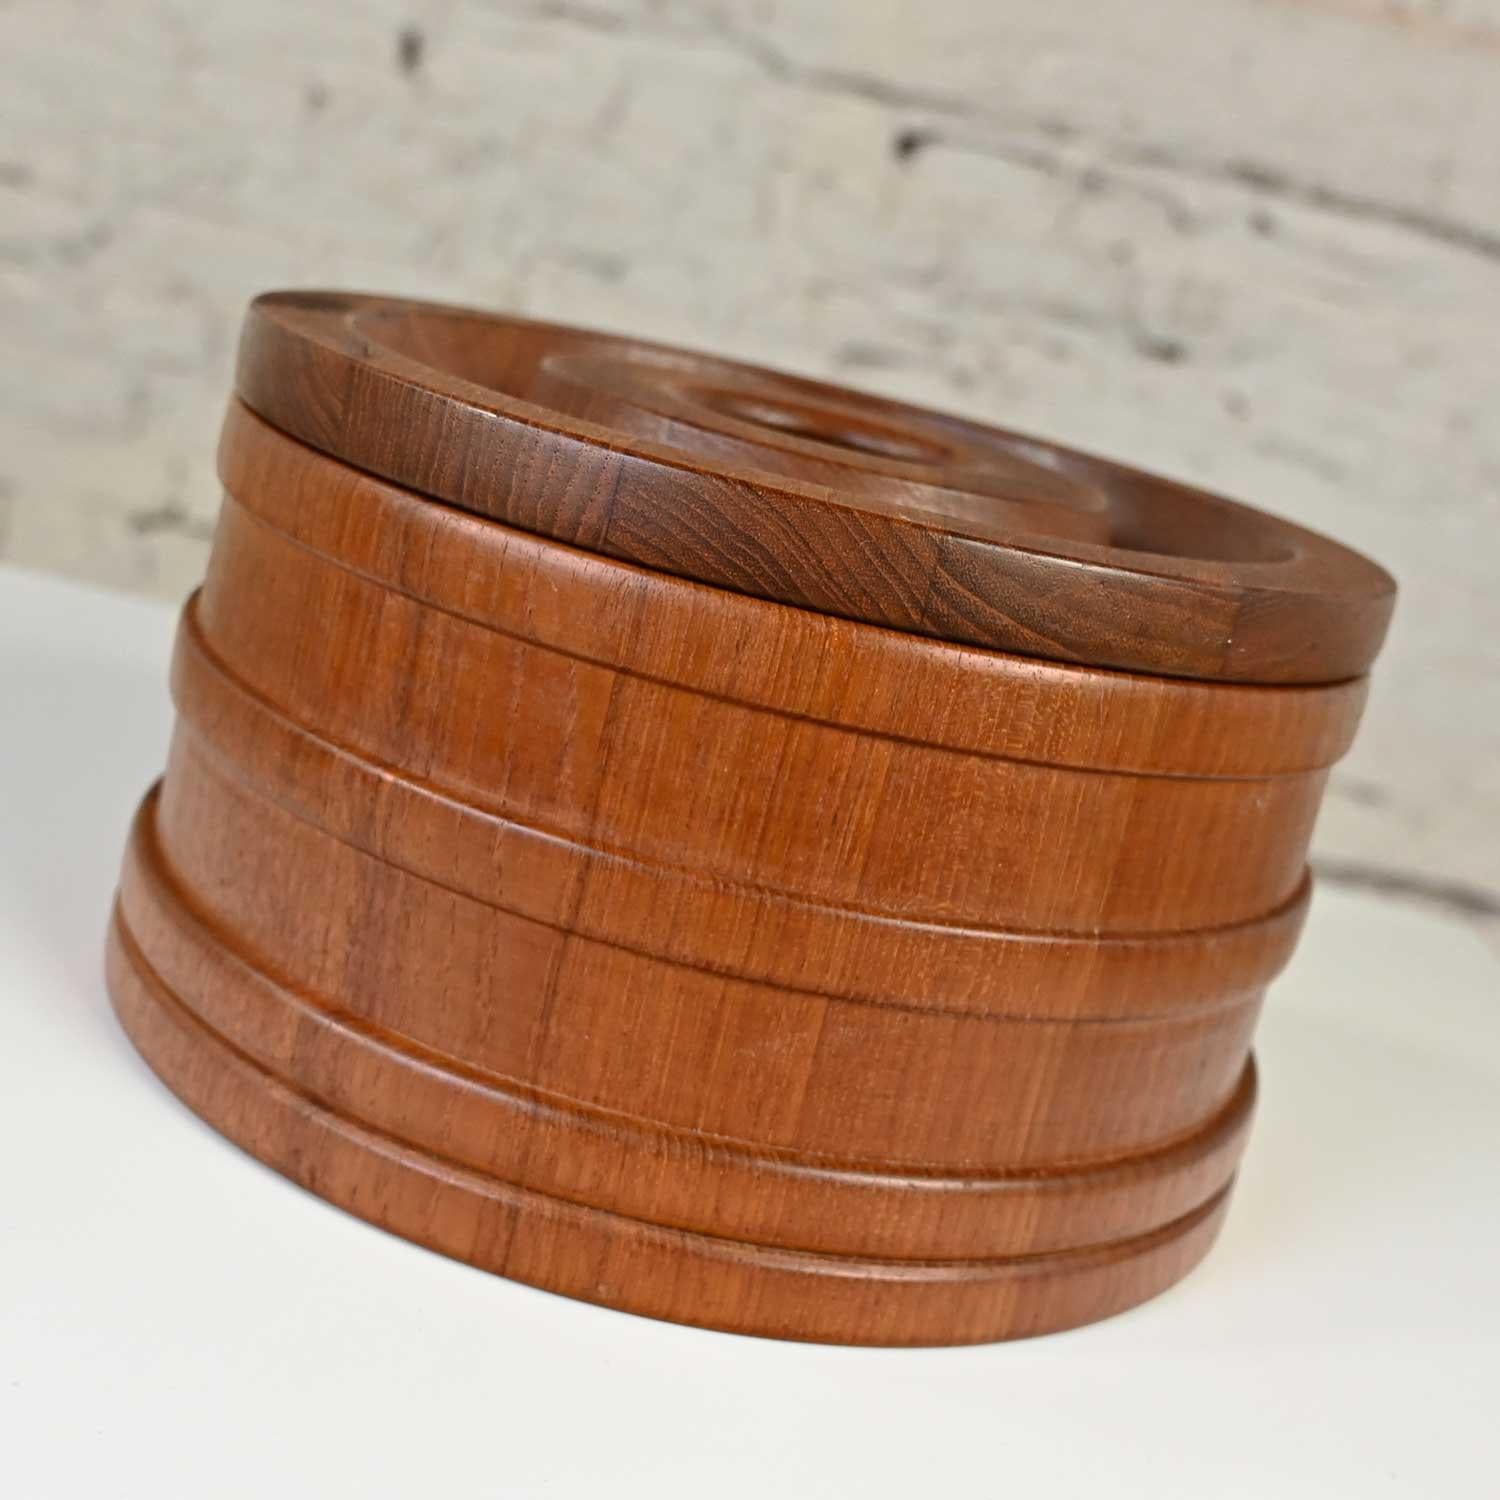 Handsome Scandinavian Modern staved teak ice bucket designed by Jens Quistgaard for Dansk Designs. Beautiful condition, keeping in mind that this is vintage and not new so will have signs of use and wear. Please see photos and zoom in for details.